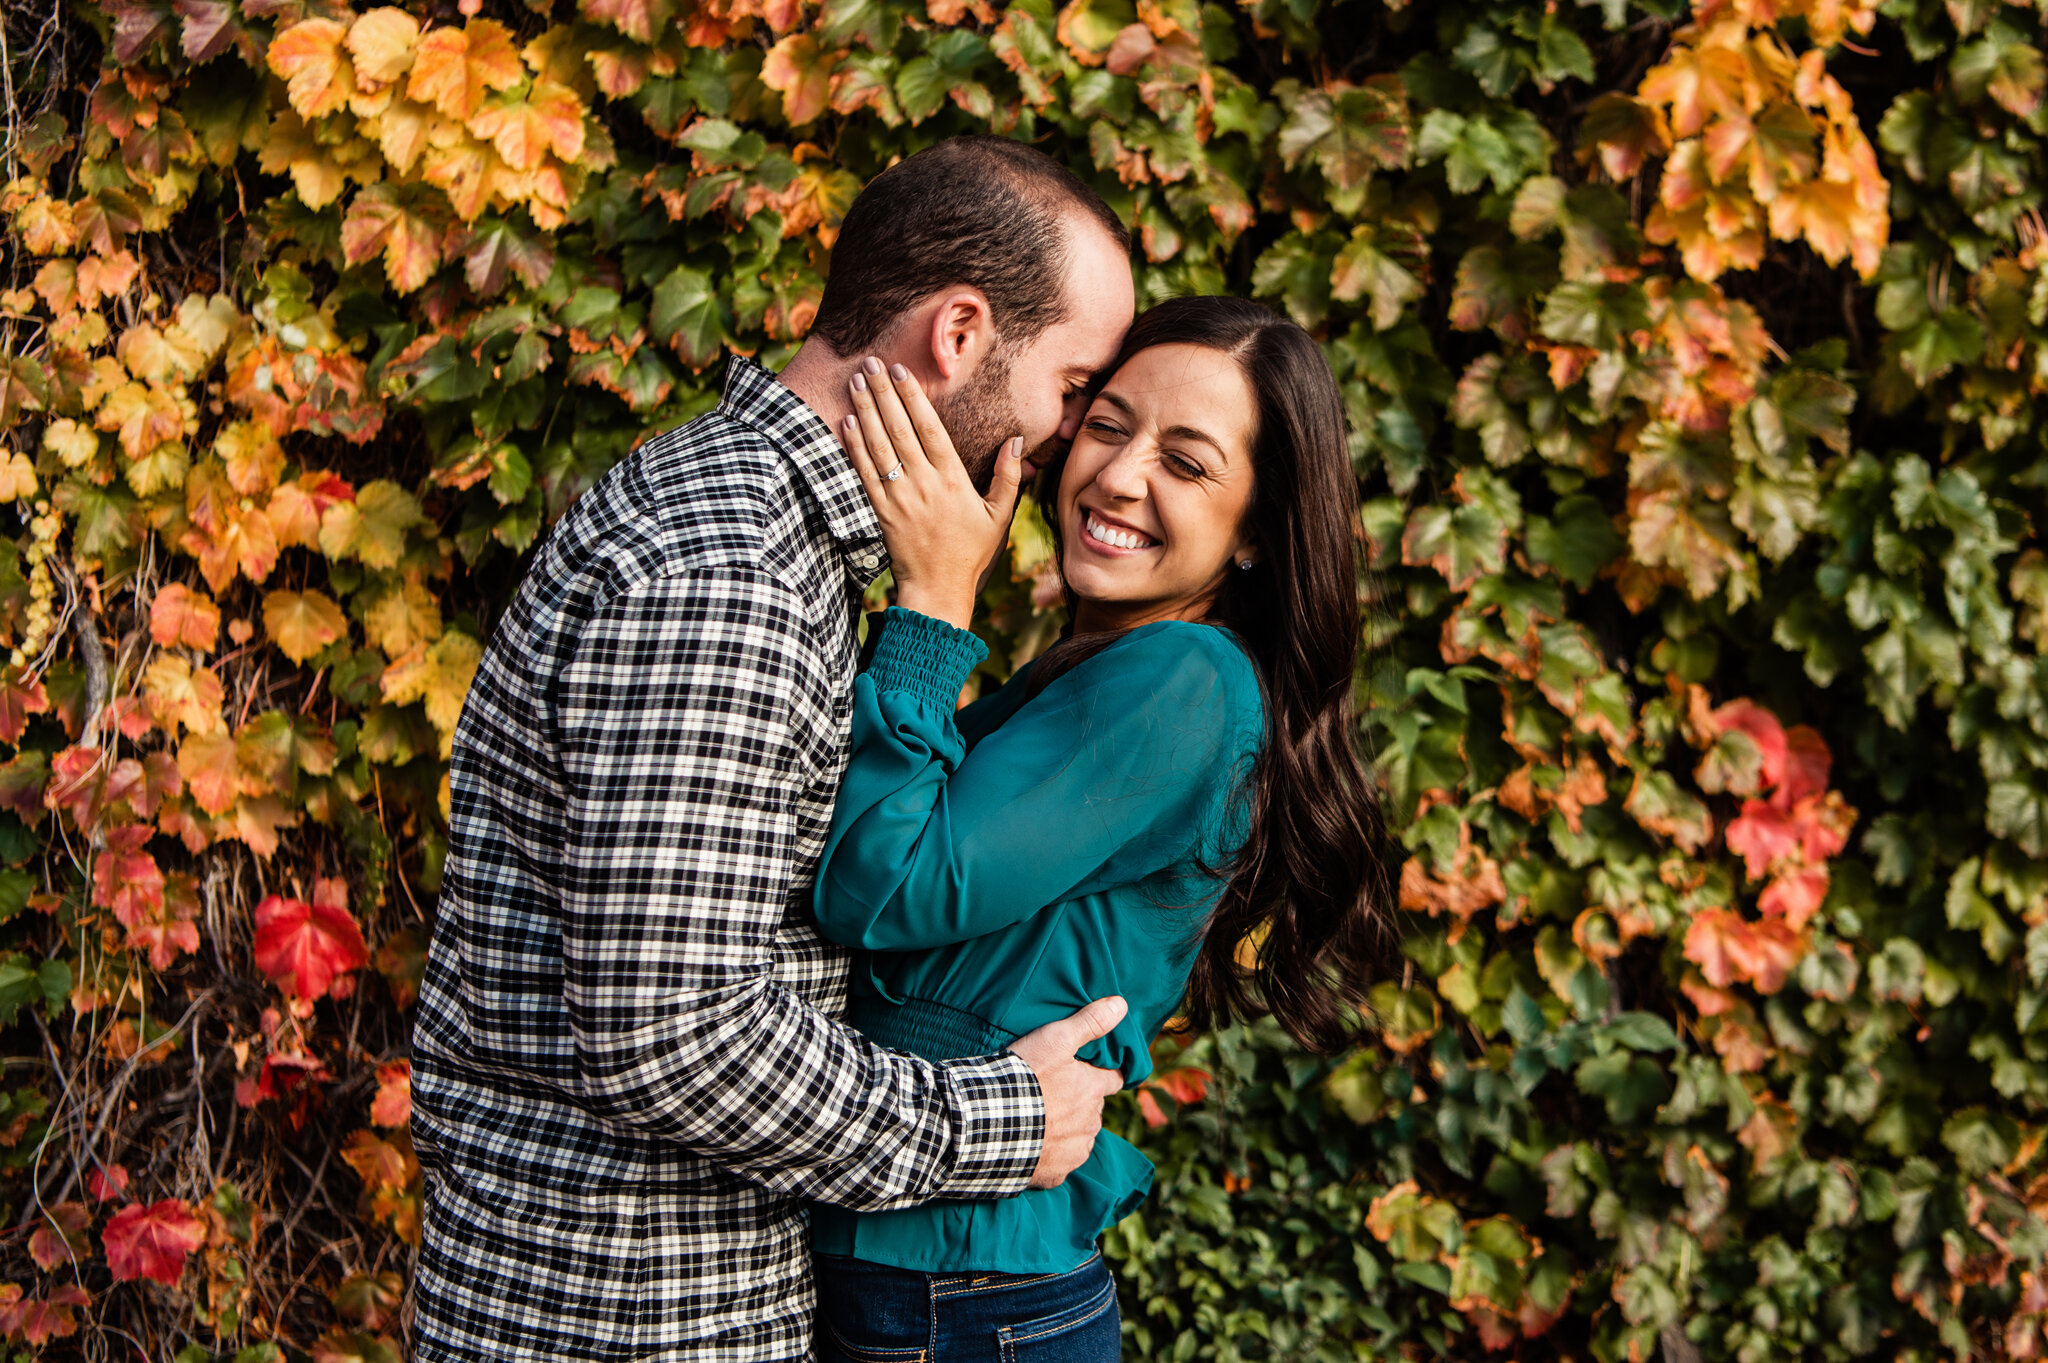 Genesee_Valley_Club_High_Falls_Rochester_Engagement_Session_JILL_STUDIO_Rochester_NY_Photographer_1300.jpg